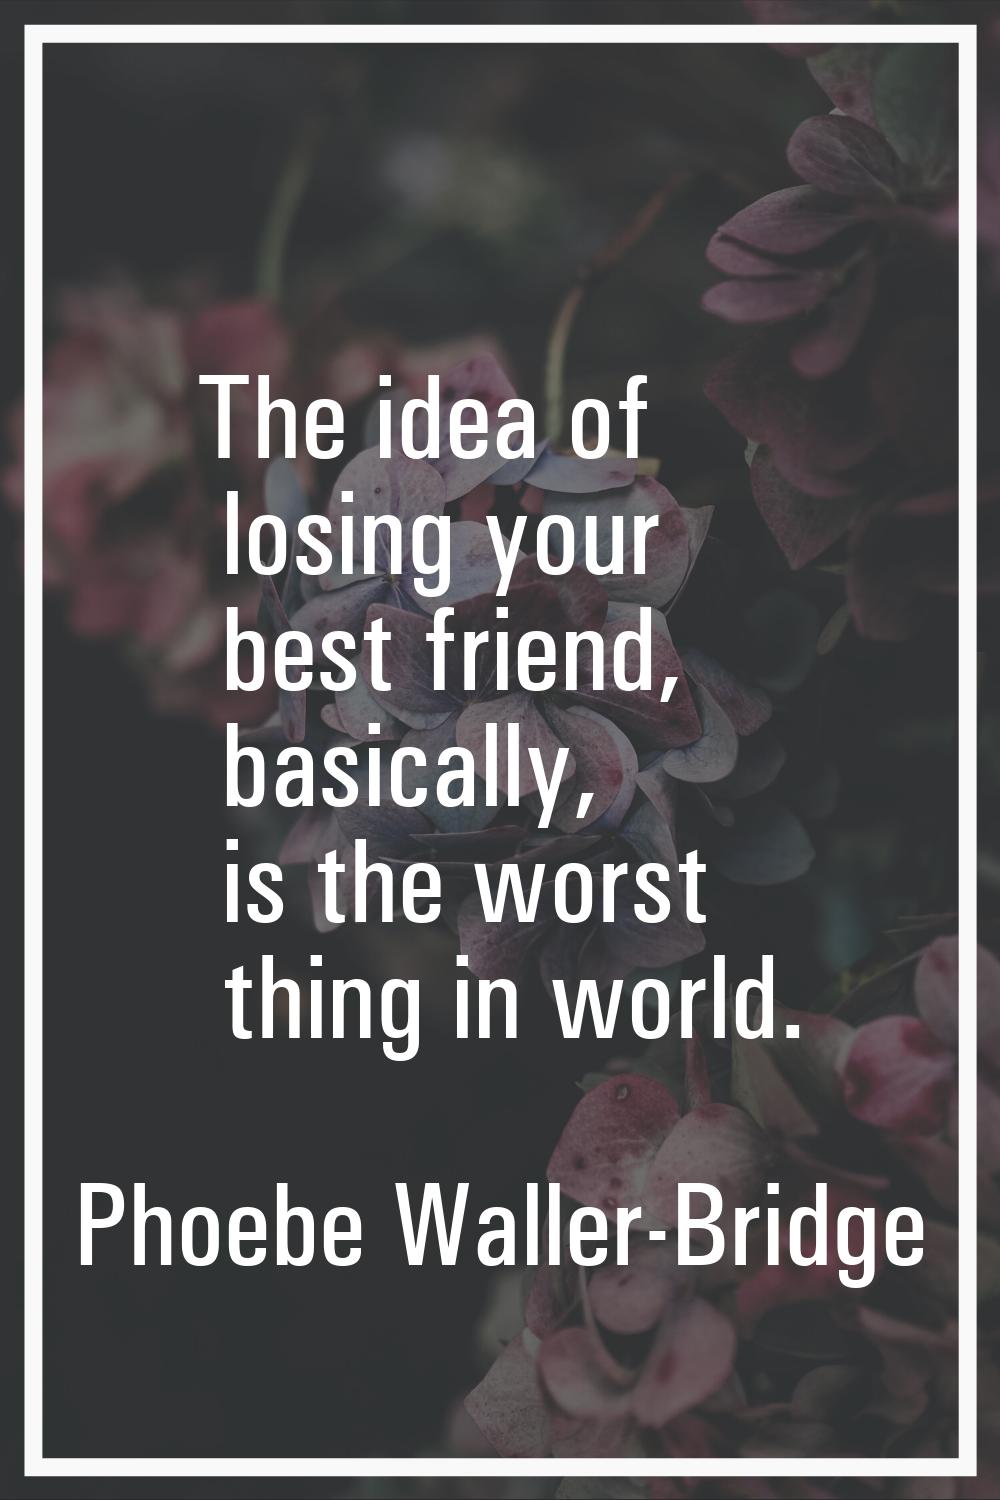 The idea of losing your best friend, basically, is the worst thing in world.